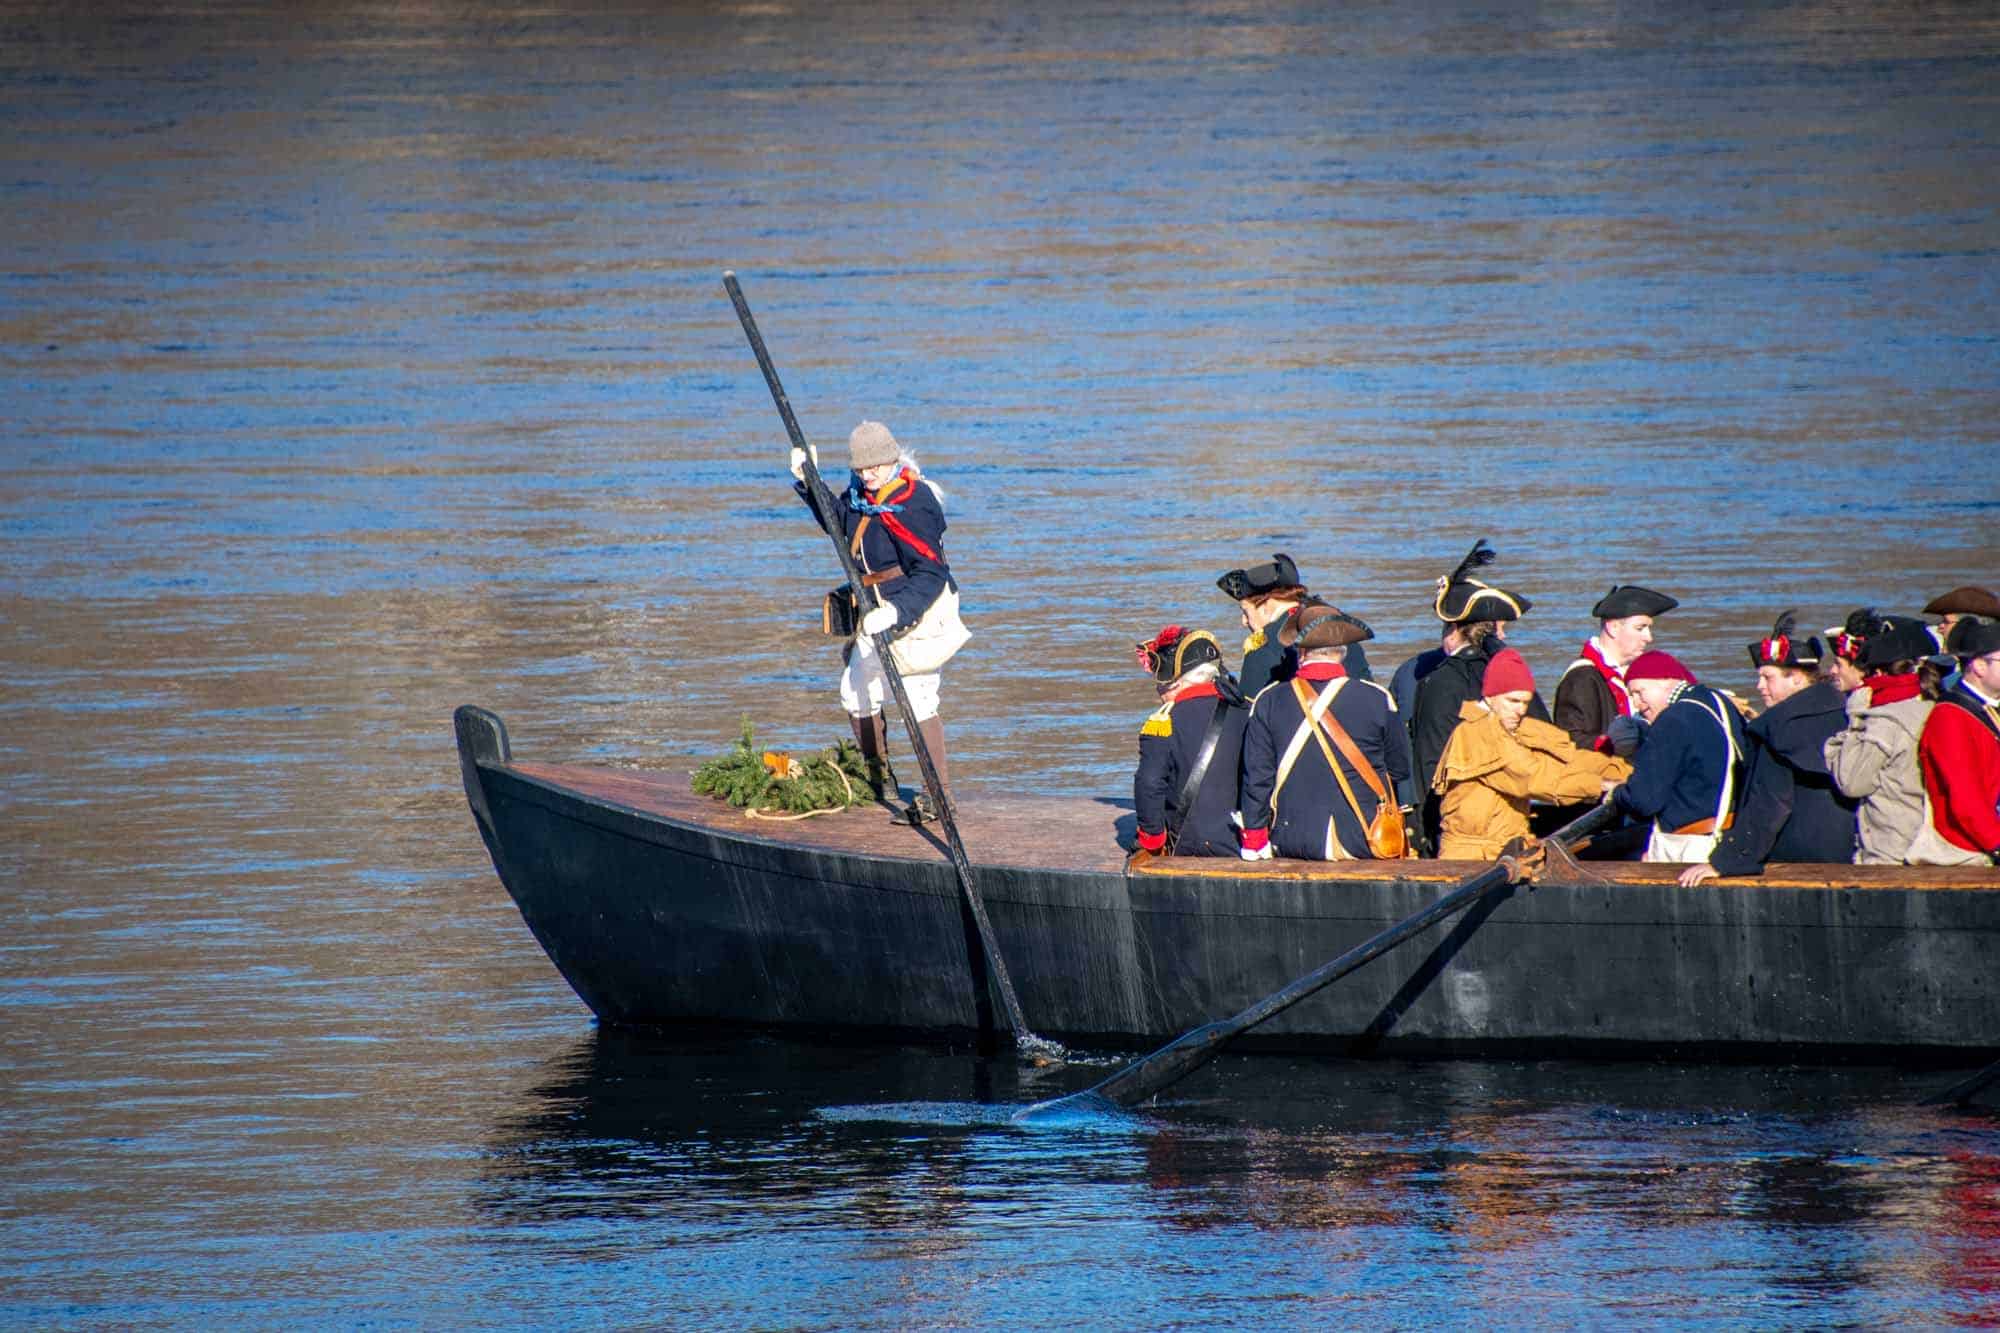 Person in Colonial dress standing on the bow of a wooden boat next to other "troops" in the boat